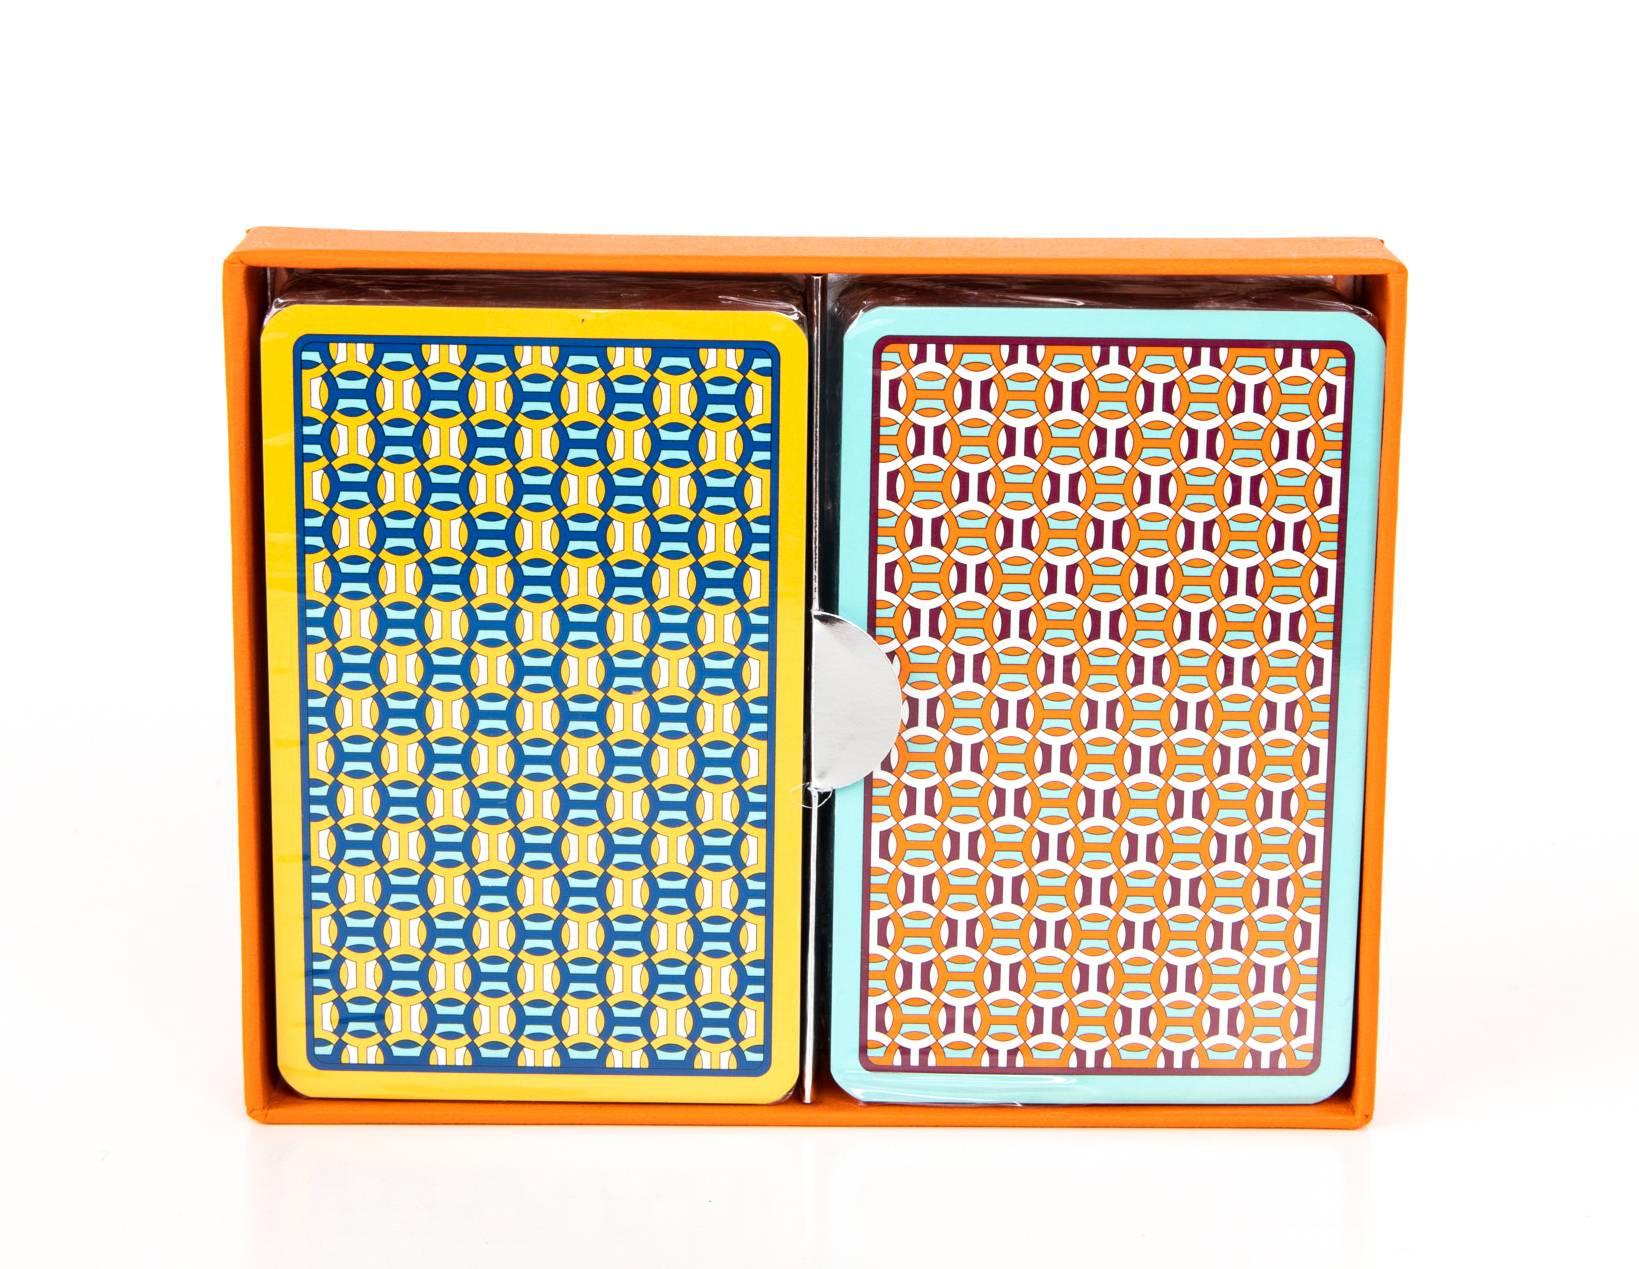 Guaranteed authentic Hermes set of playing cards in a fresh Chain de Ancre design. 
1 set is yellow and blue. The other is blue orange, purple and green. 
The cards are new and sealed. 
Comes with signature Hermes box.
Please visit mightykismet